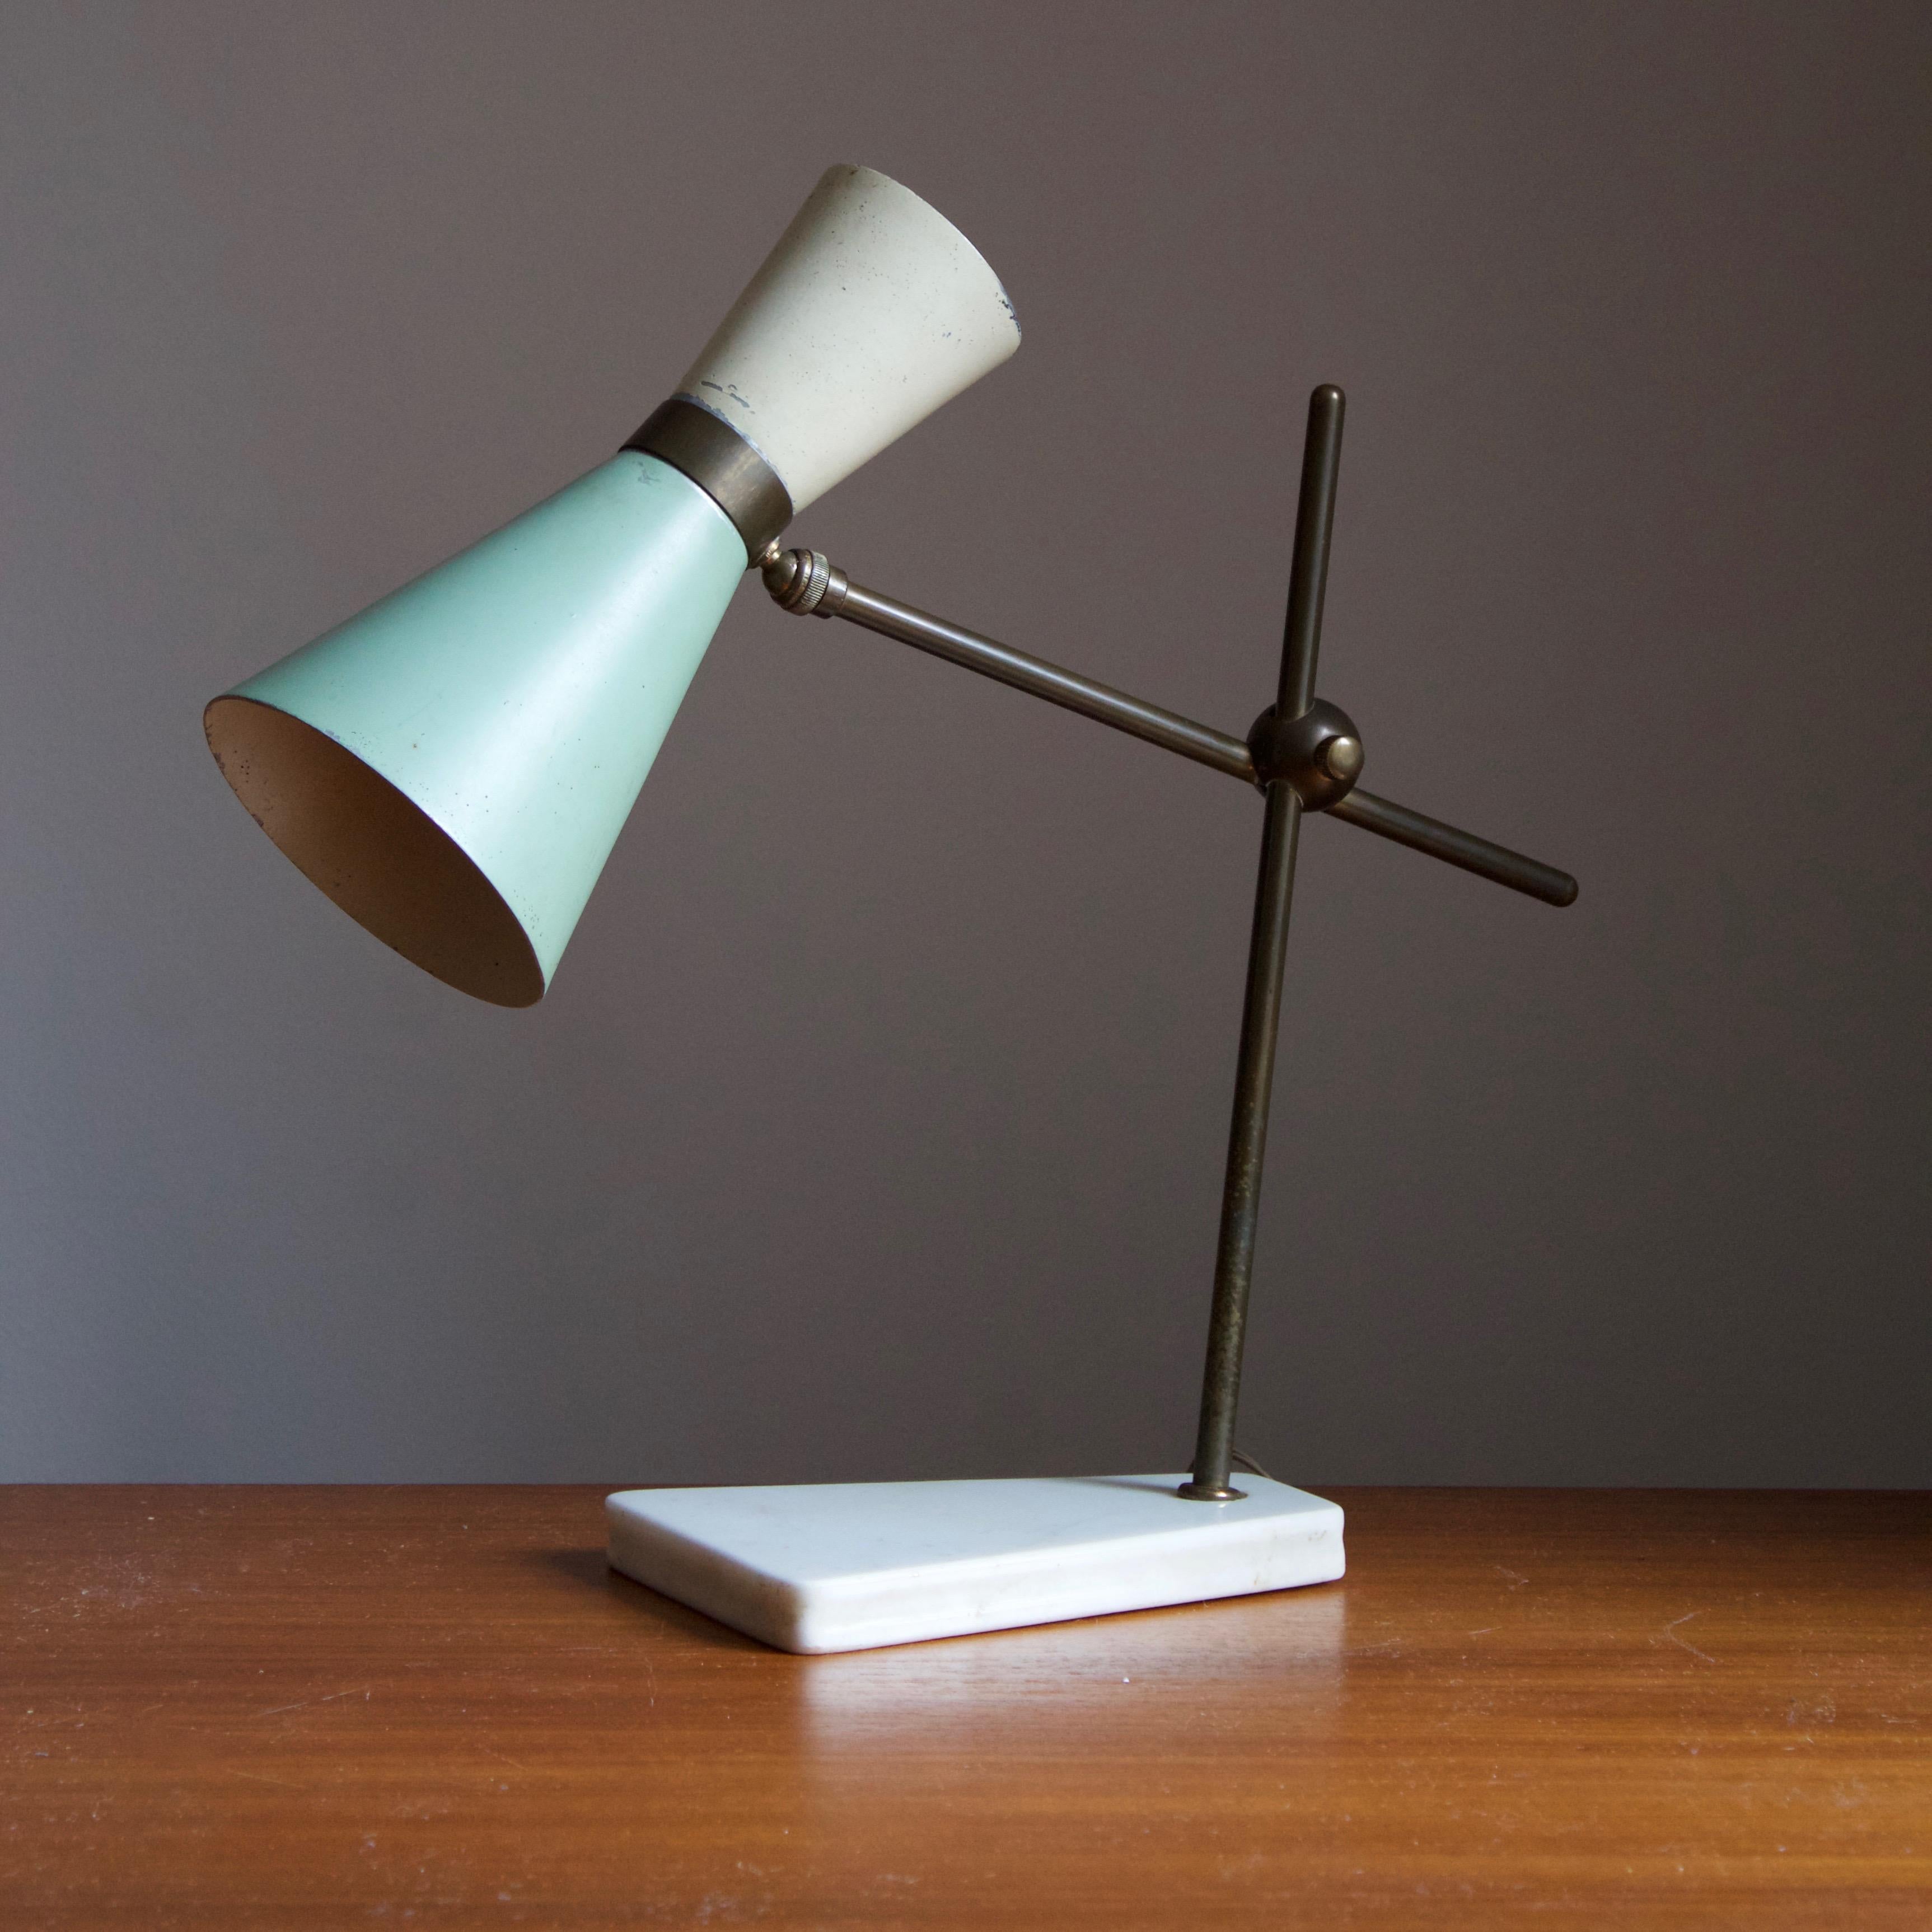 An adjustable table lamp. In wood, metal, and copper. Sourced in Italy. 

Other designer of the period include Gio Ponti, Franco Albini, Angelo Lelii, and Max Ingrand.